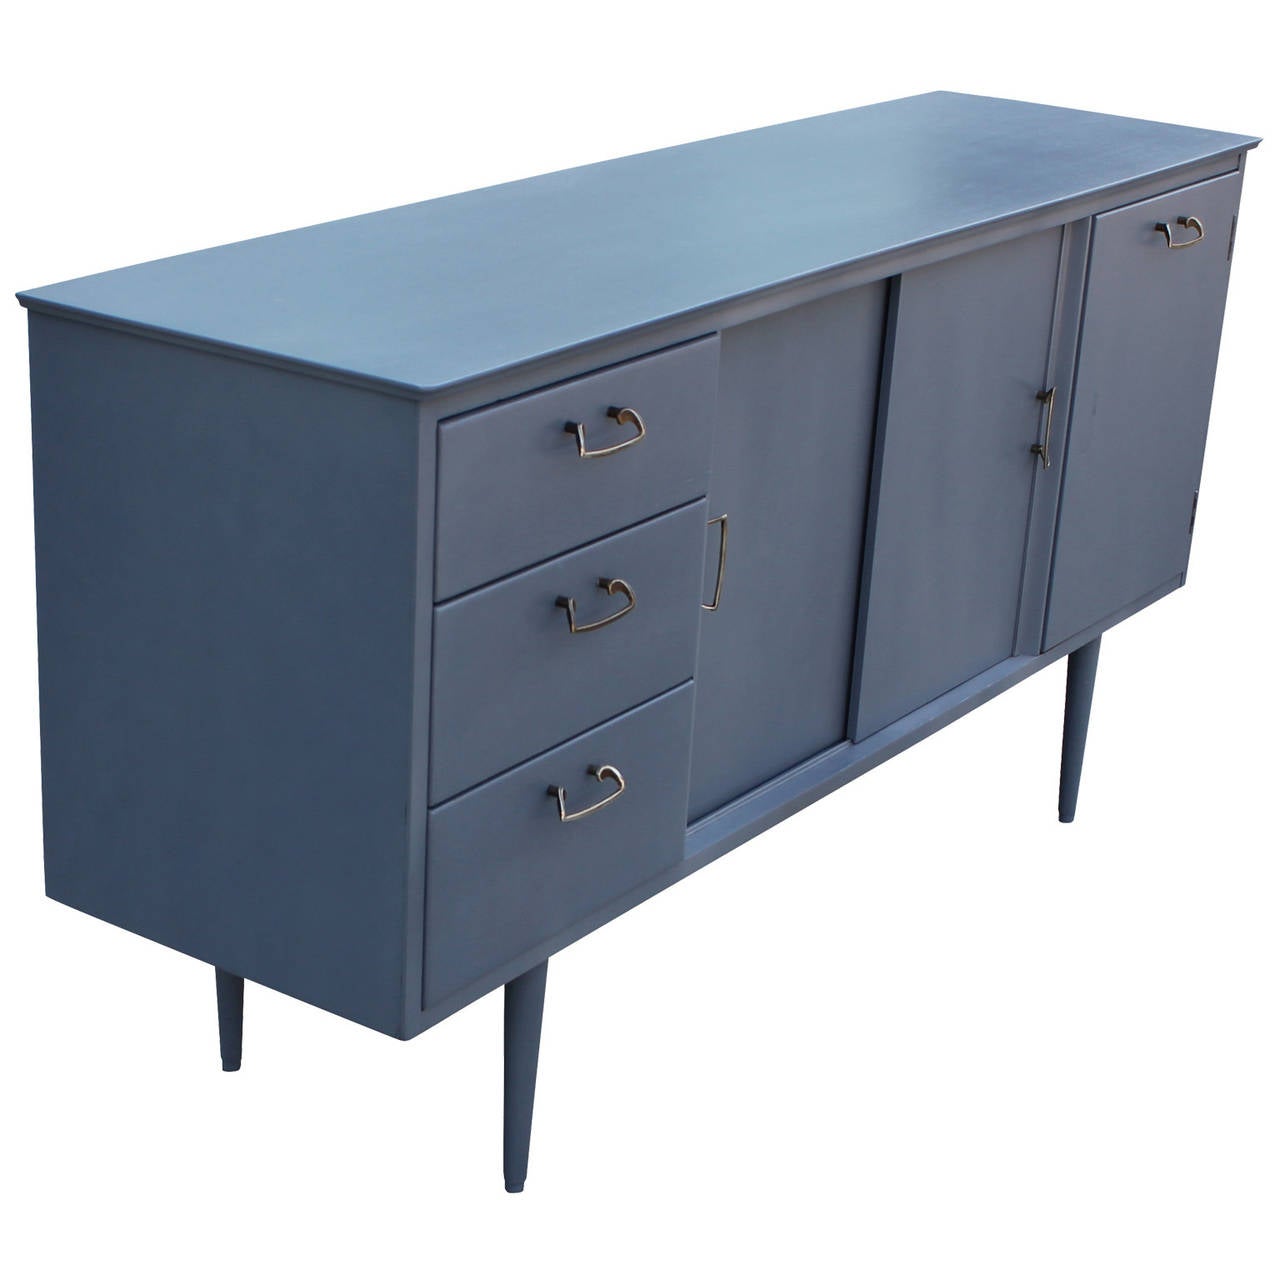 Light grey-blue sideboard with aged brass handles. Sideboard or Credenza is made out of teak. The piece has been stained a beautiful pale French Blue Grey. Chrome handles. The first of three drawers is slotted for service. Two sliding doors open to